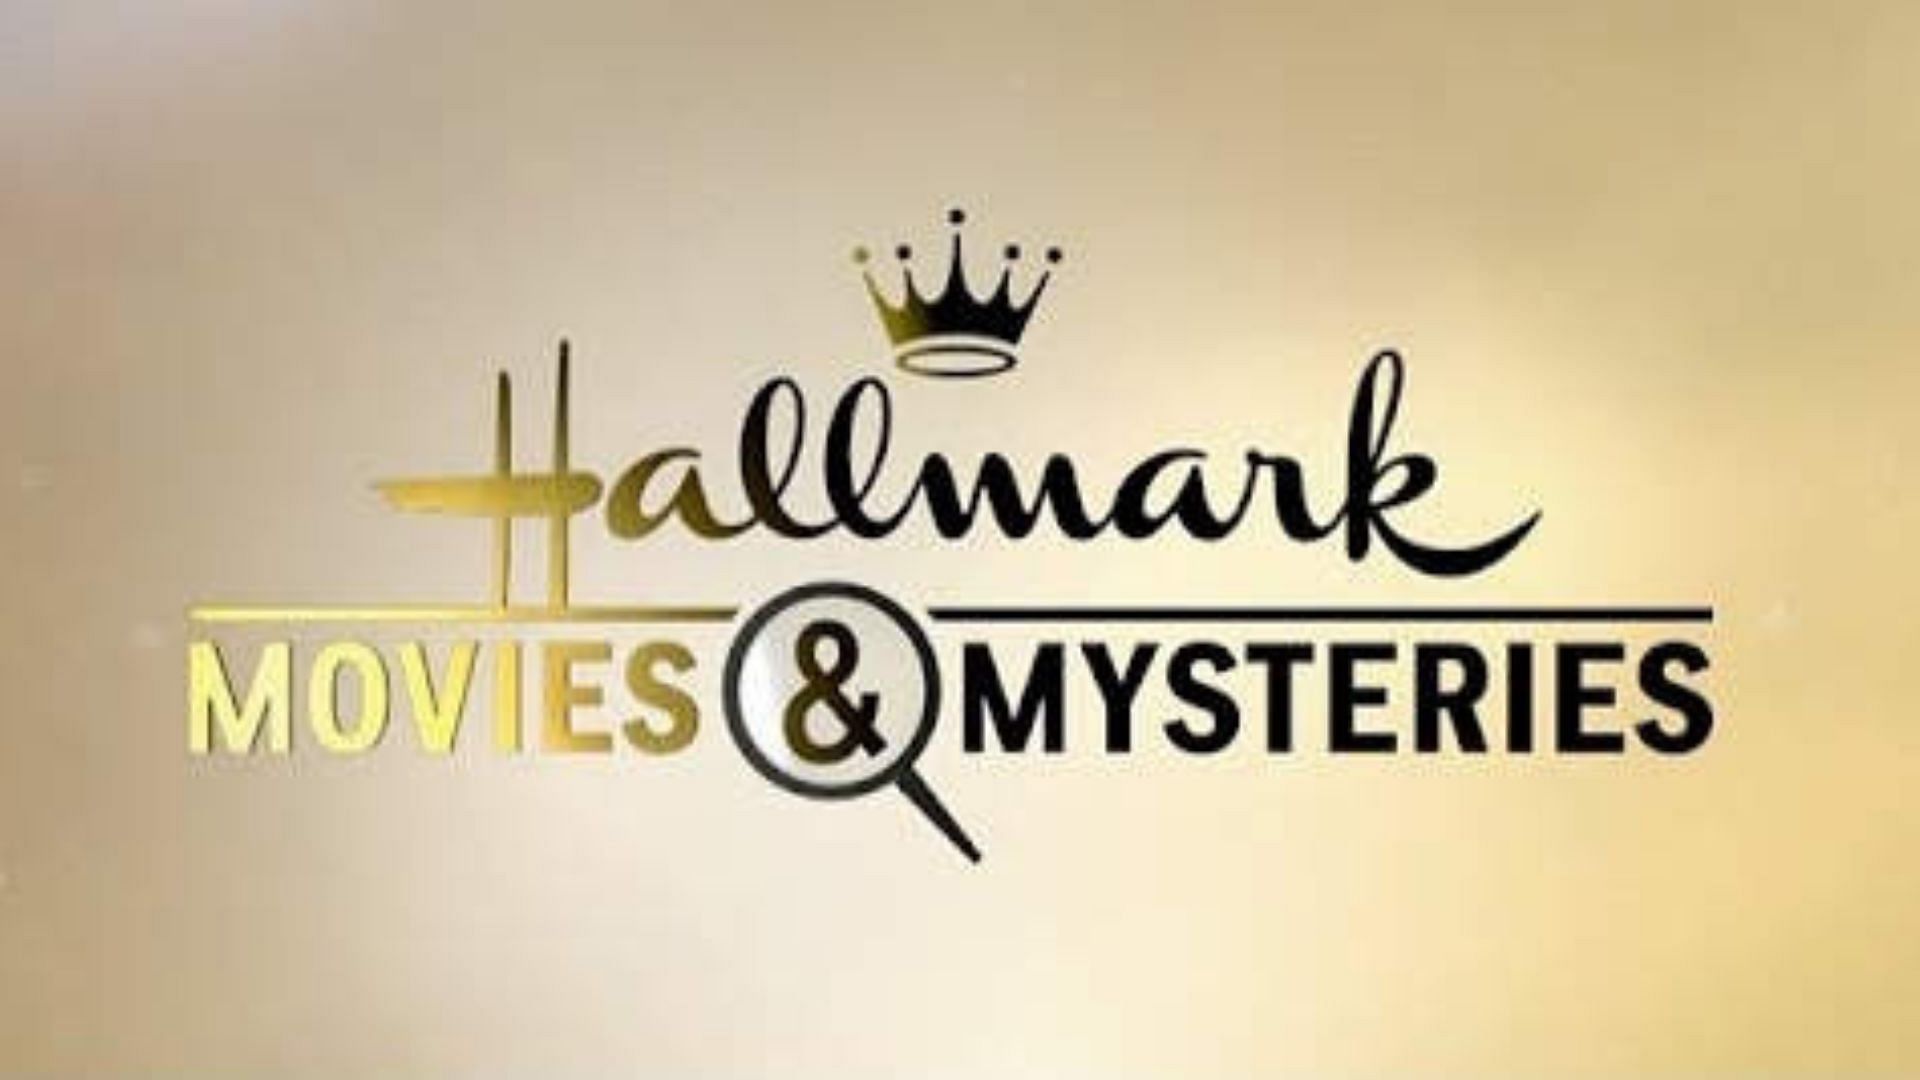 5 new Hallmark Movies & Mysteries releases in October 2022